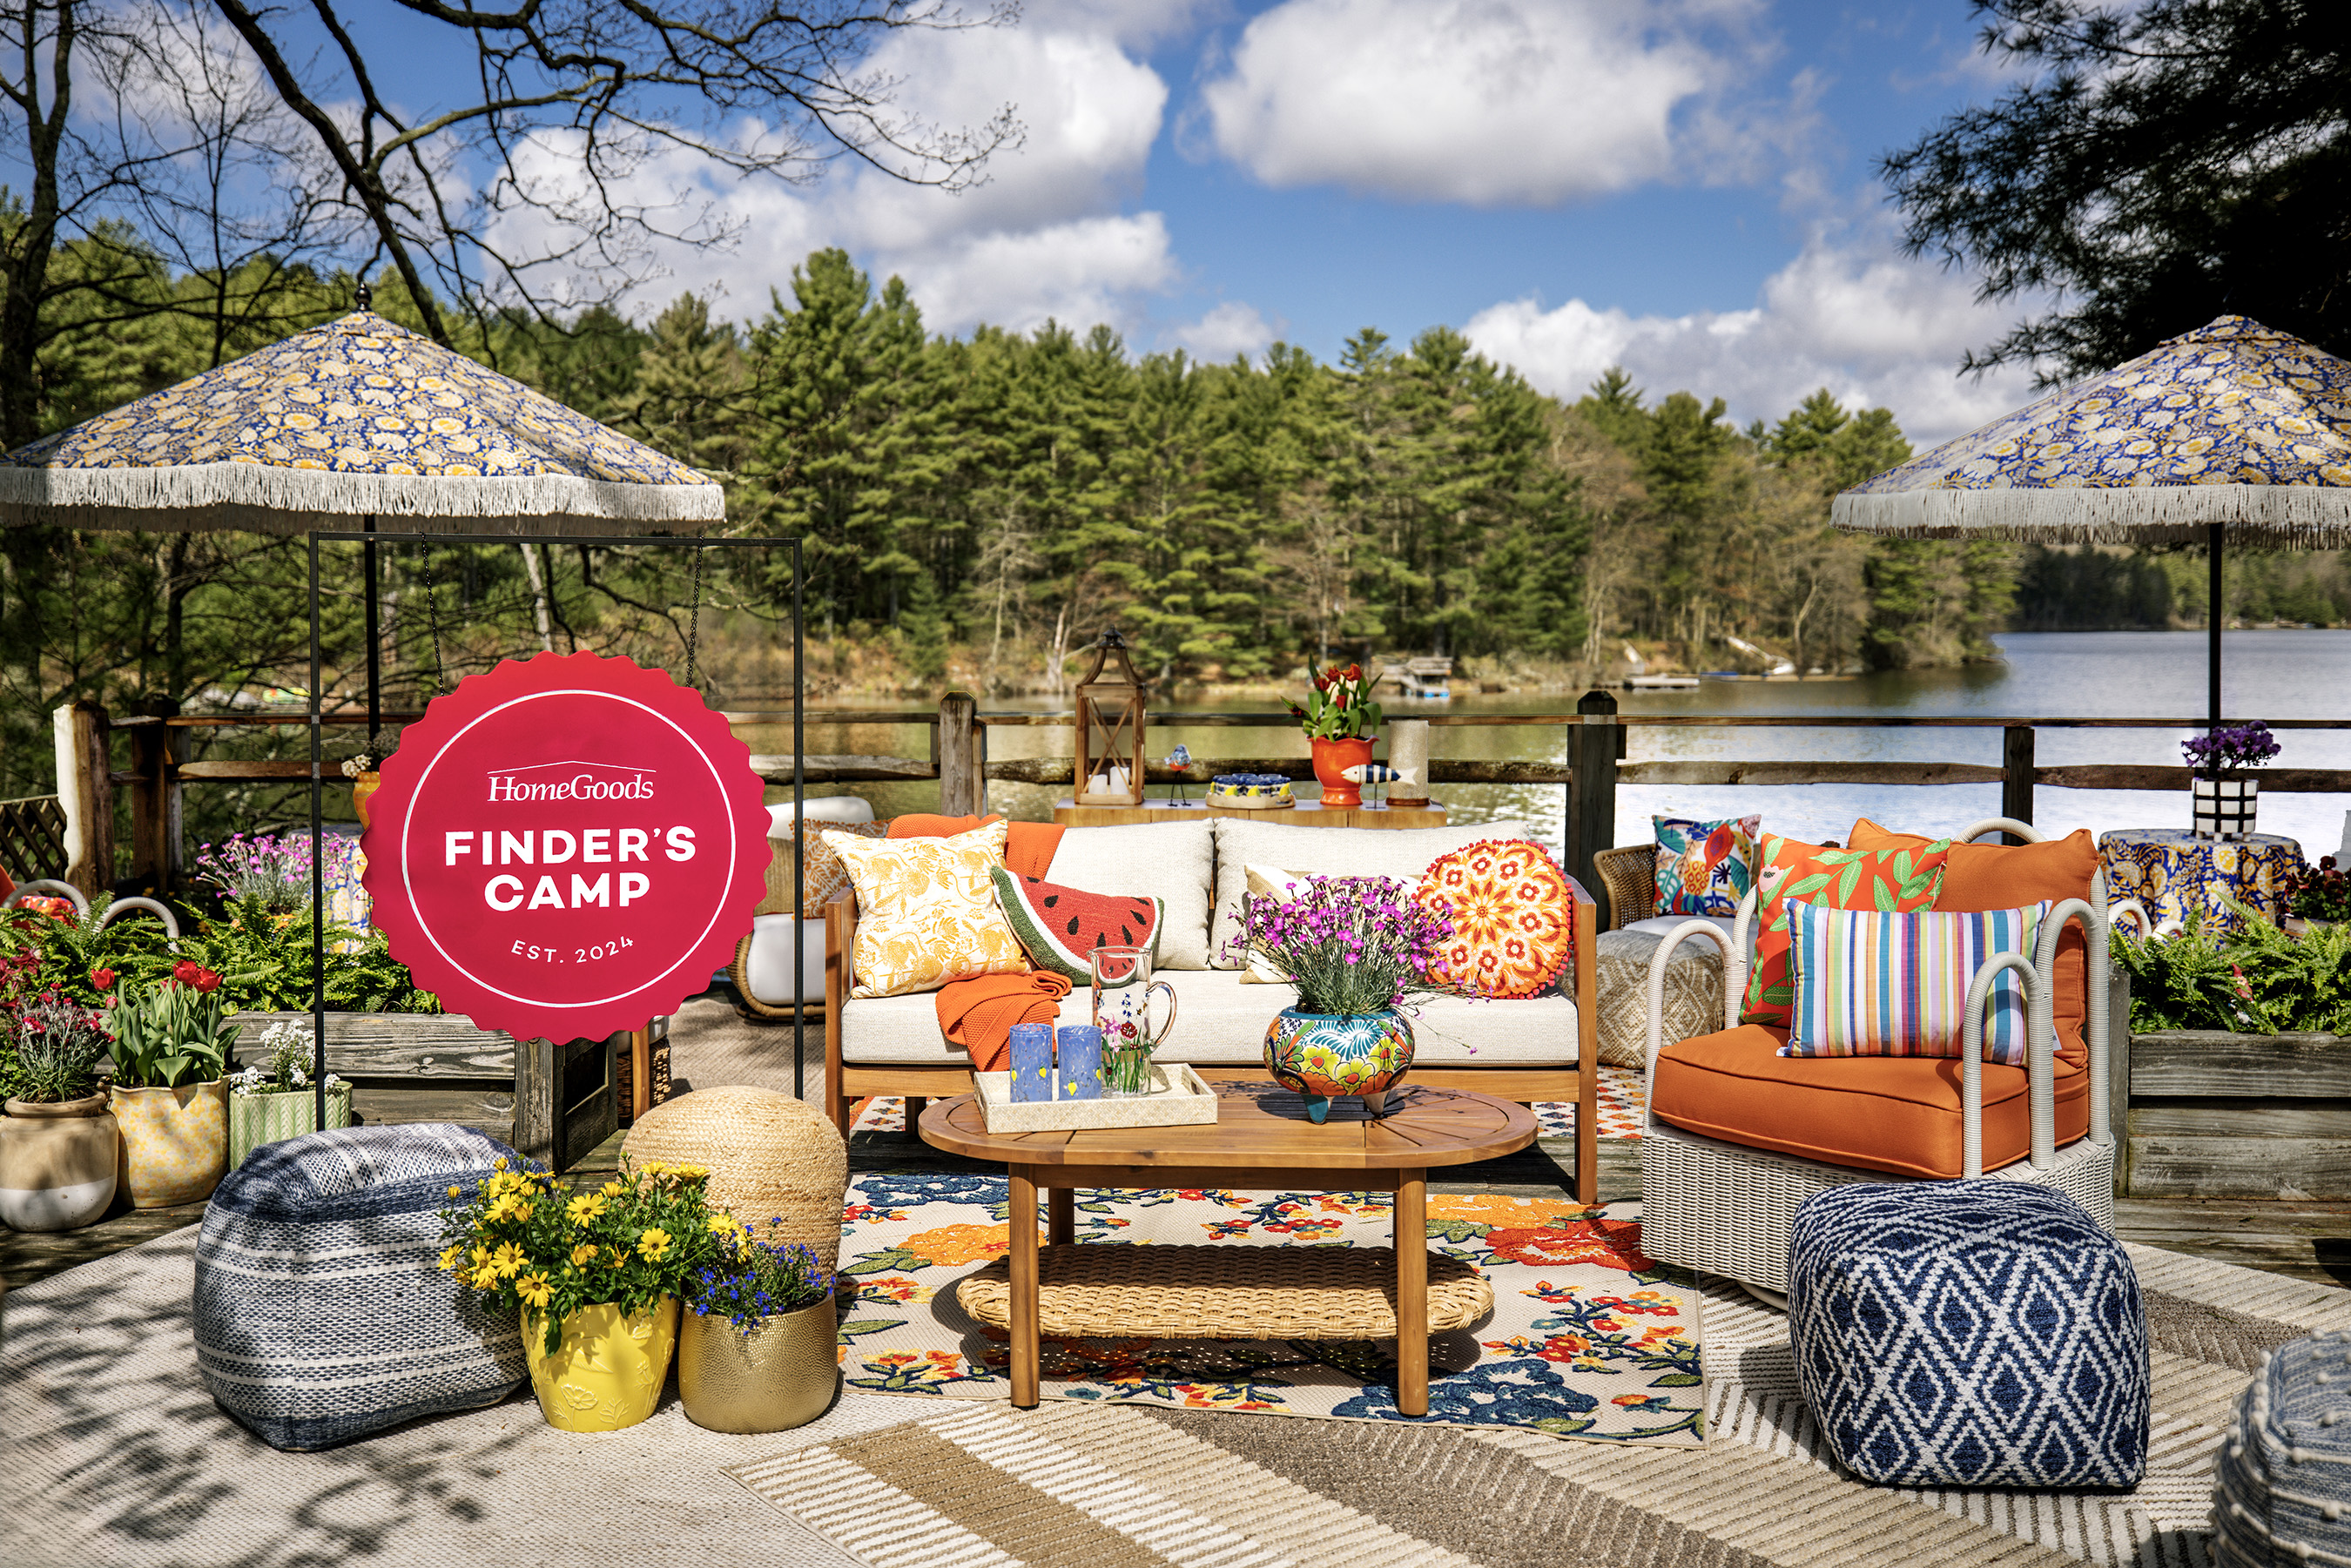 Passionate HomeGoods brand fans can now revel in the thrilling feeling shoppers experience in stores at a reimagined summer camp in the Catskills of New York from June 7-9.